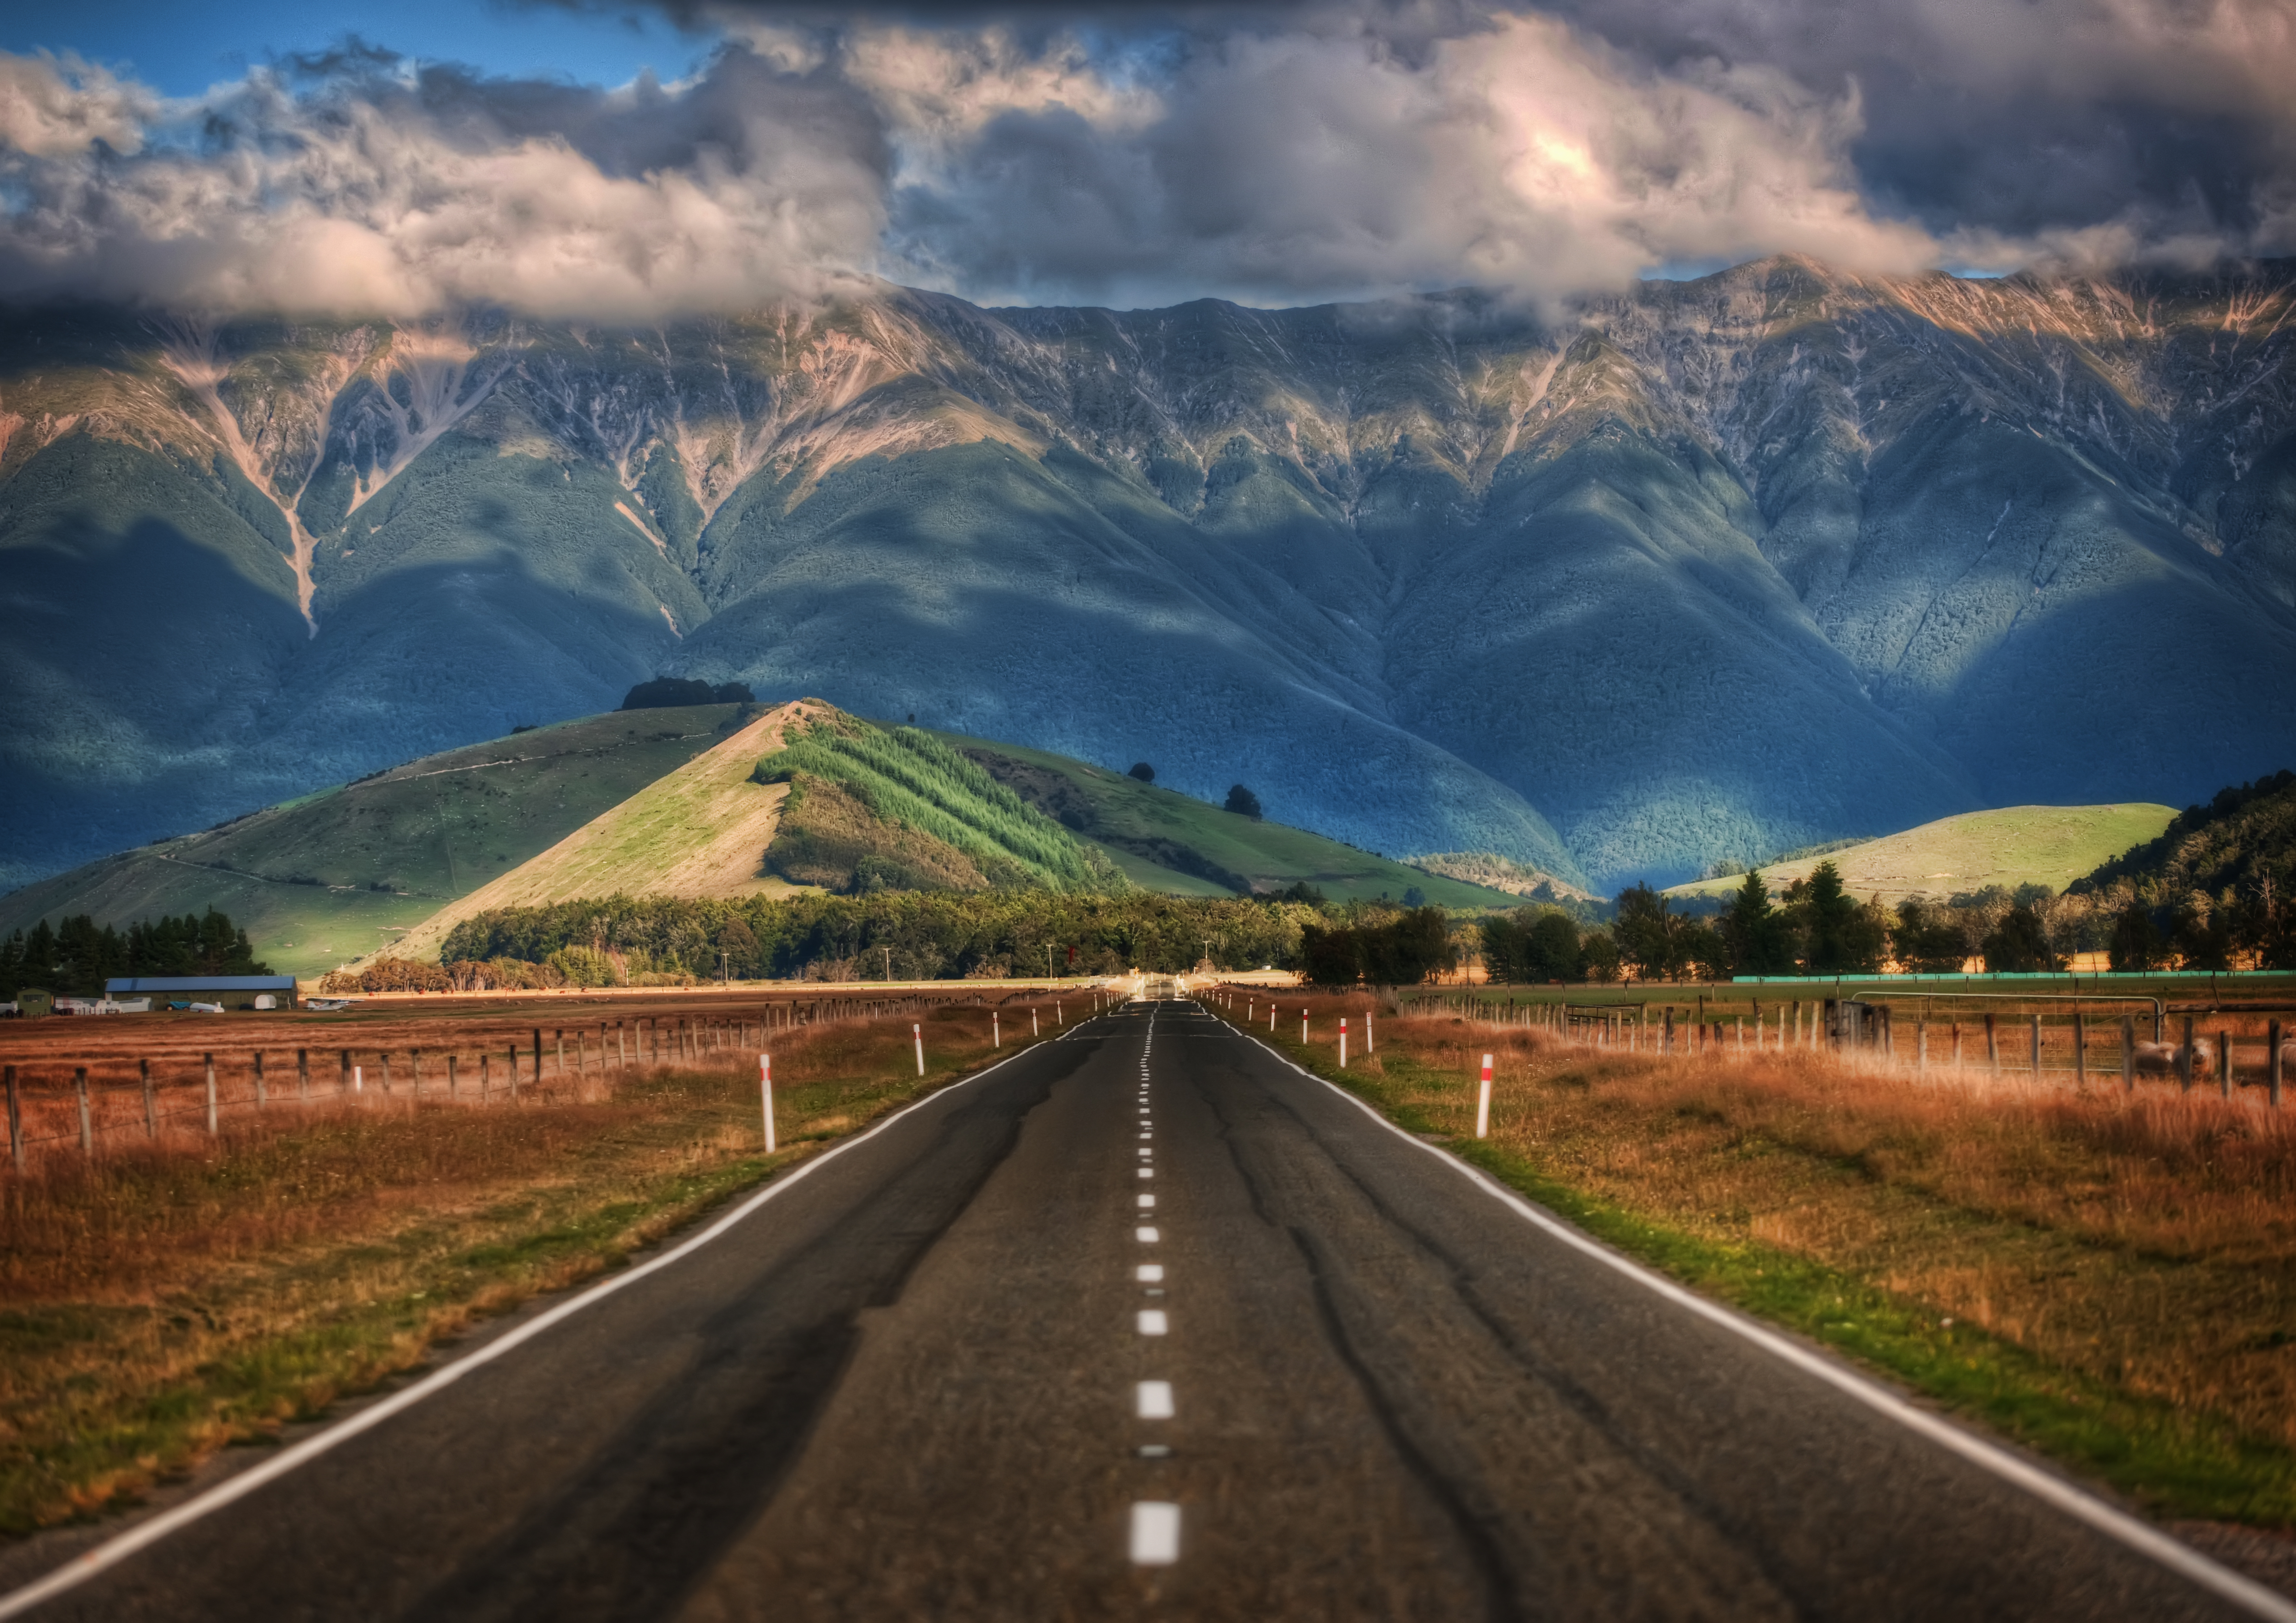 Road Tripping by Trey Ratcliff